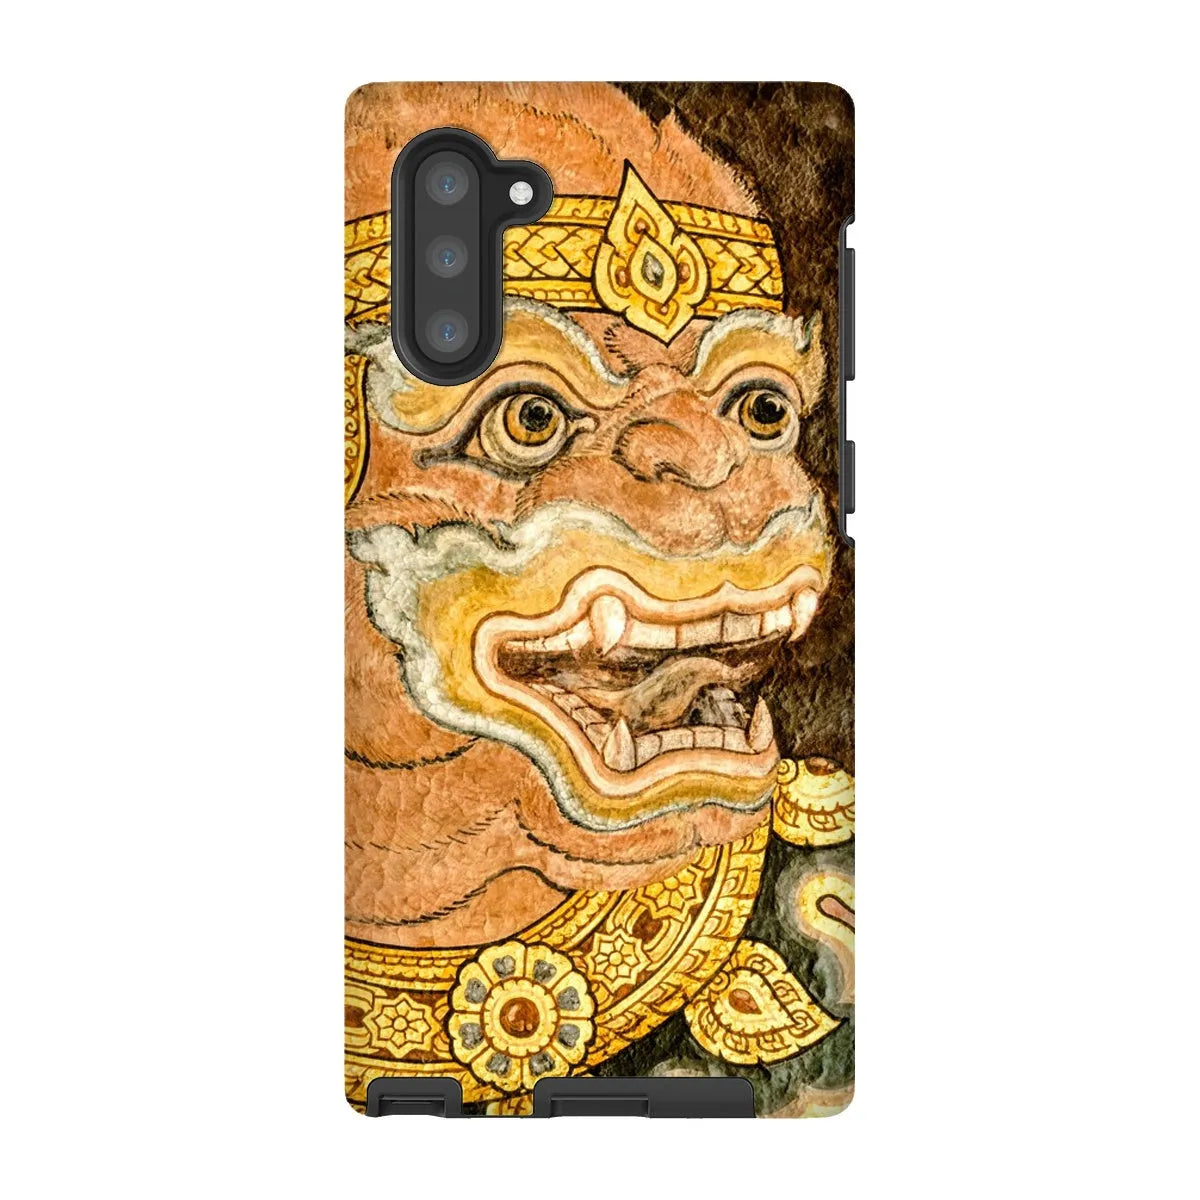 Monkey See - Traditional Thai Aesthetic Art Phone Case - Iphone 8 / Matte - Mobile Phone Cases - Aesthetic Art